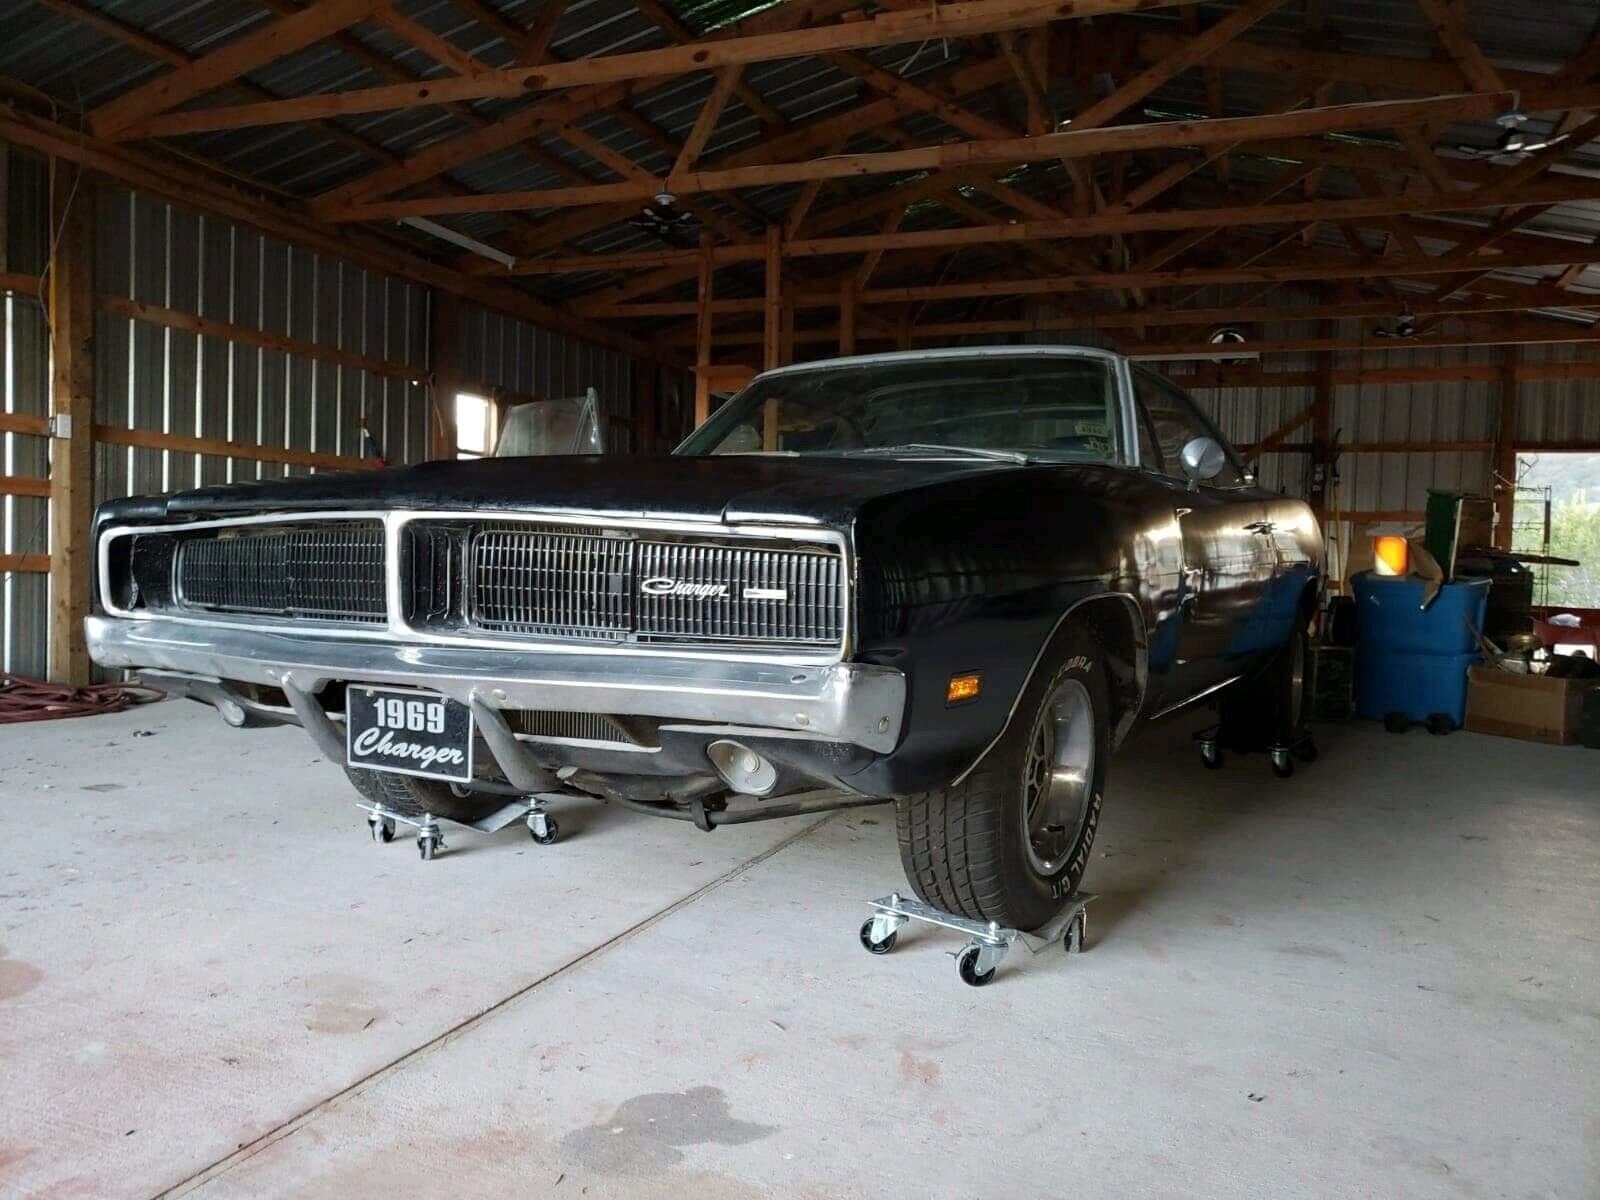 Black 1969 Dodge Charger 440 Parked in a Barn Looks Ready to Go Hunting,  Not So Fast - autoevolution